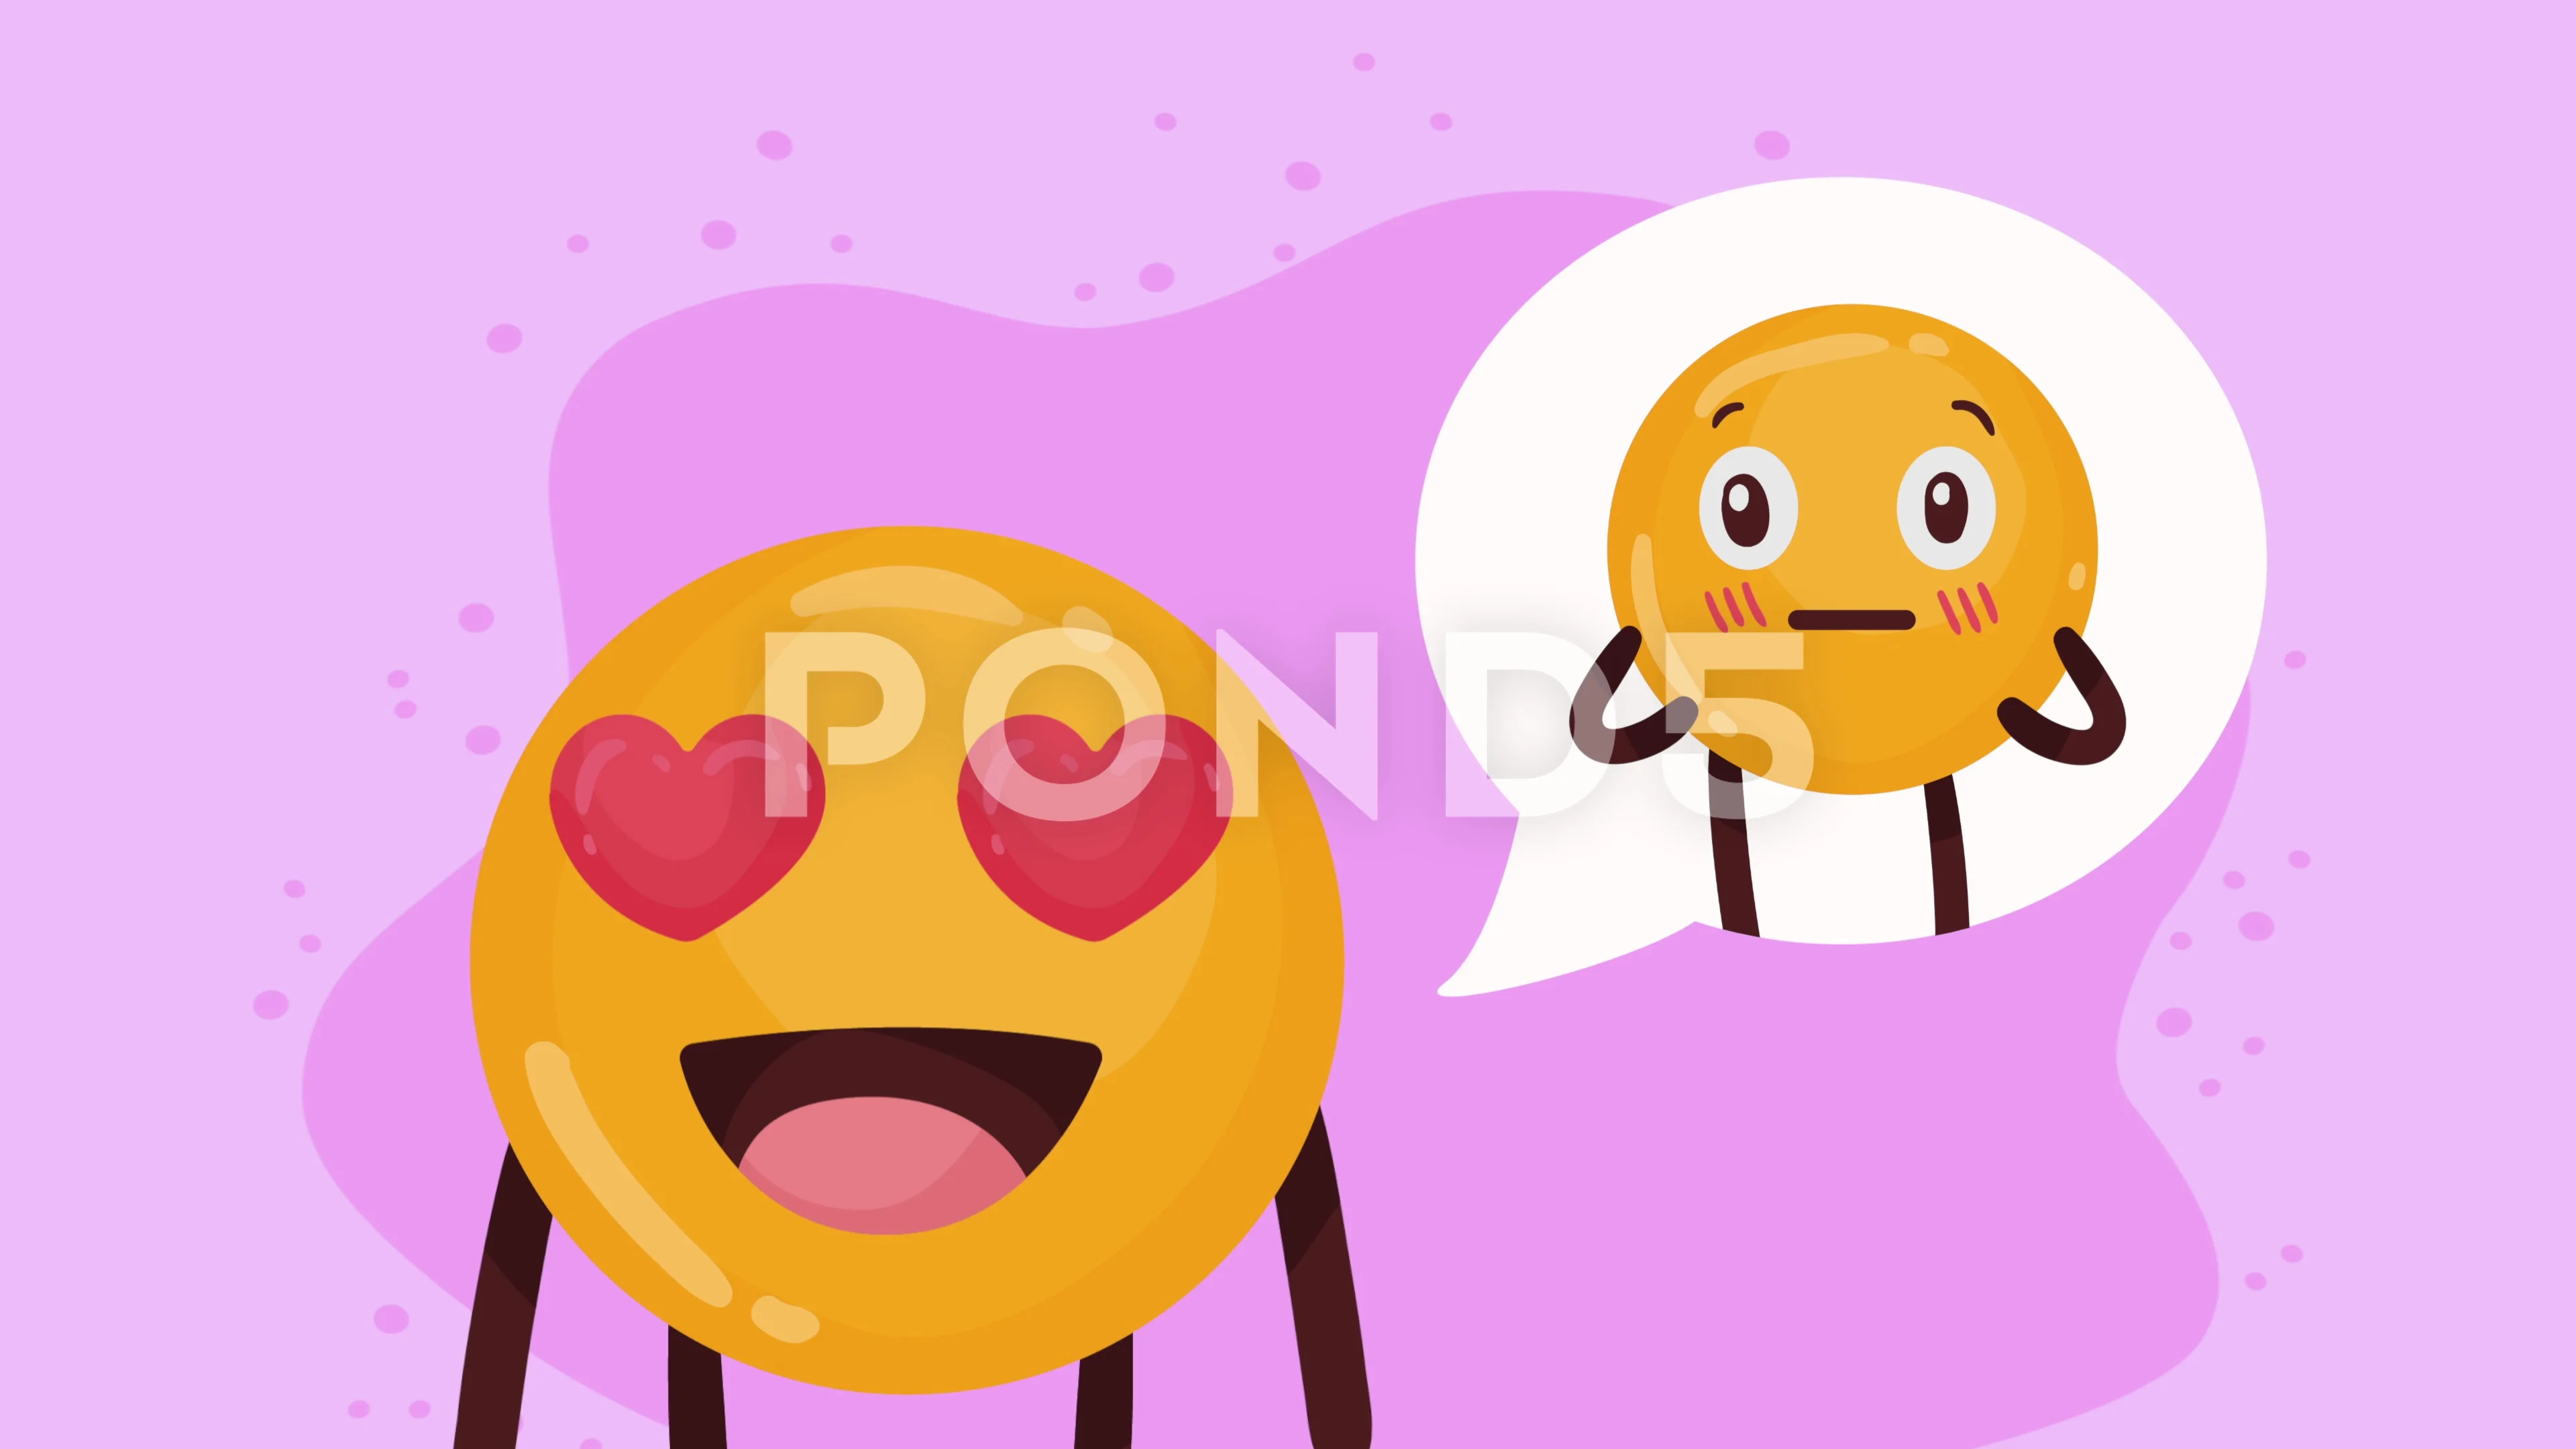 Inlove Emoji with Heart Comic Character Stock Footage - Video of love,  expression: 261593132